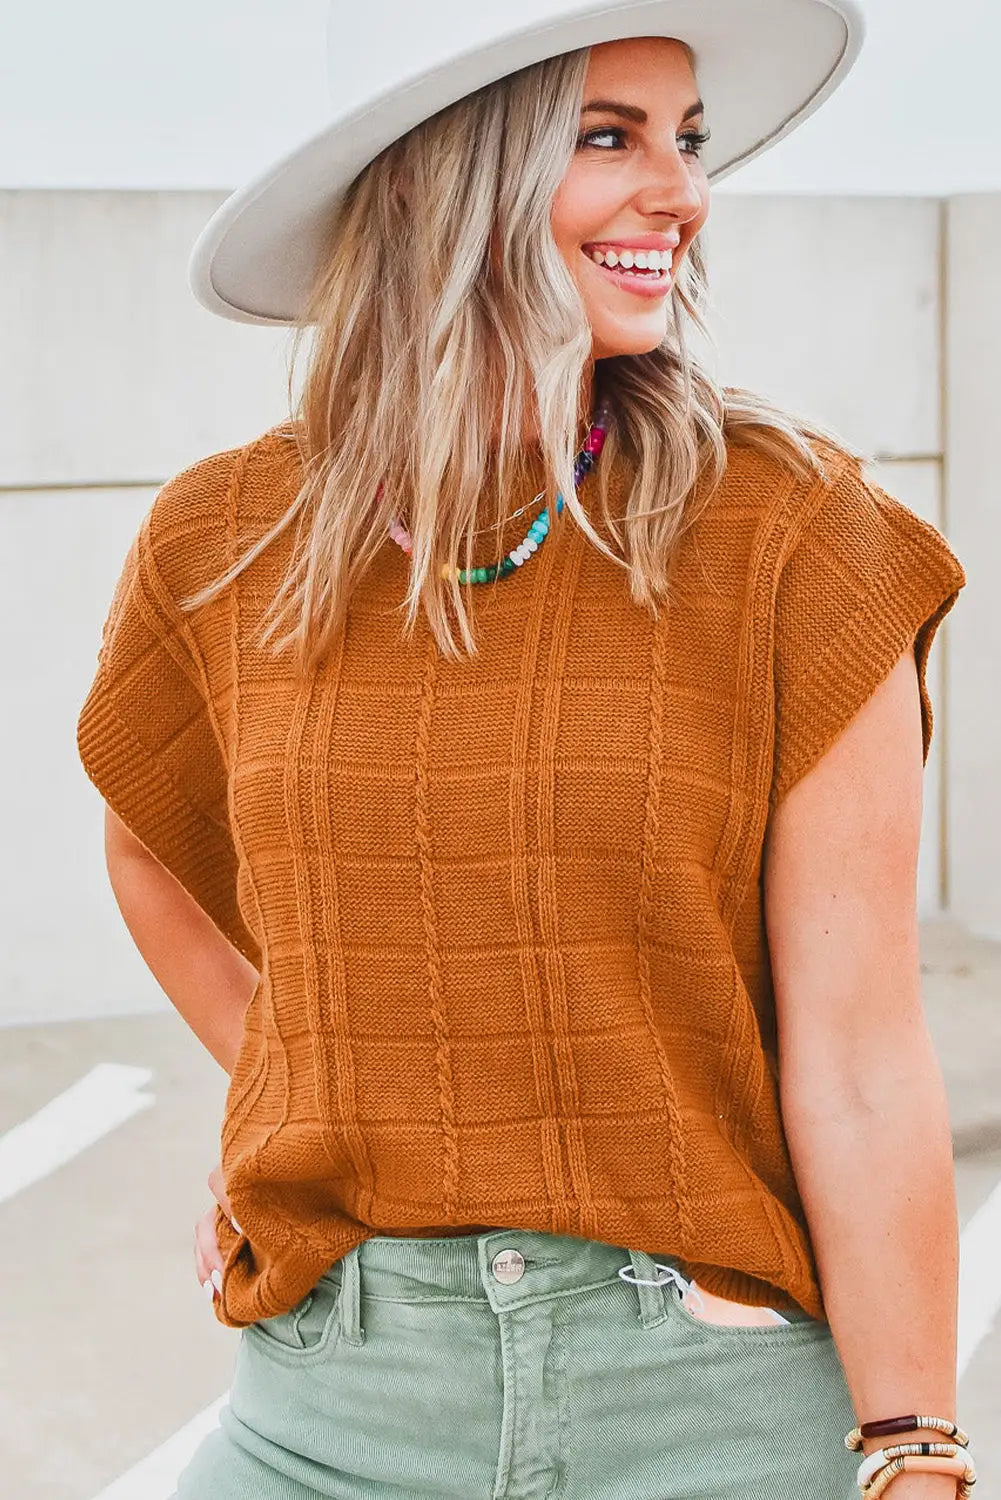 Chestnut grid textured short sleeve sweater - sweaters & cardigans